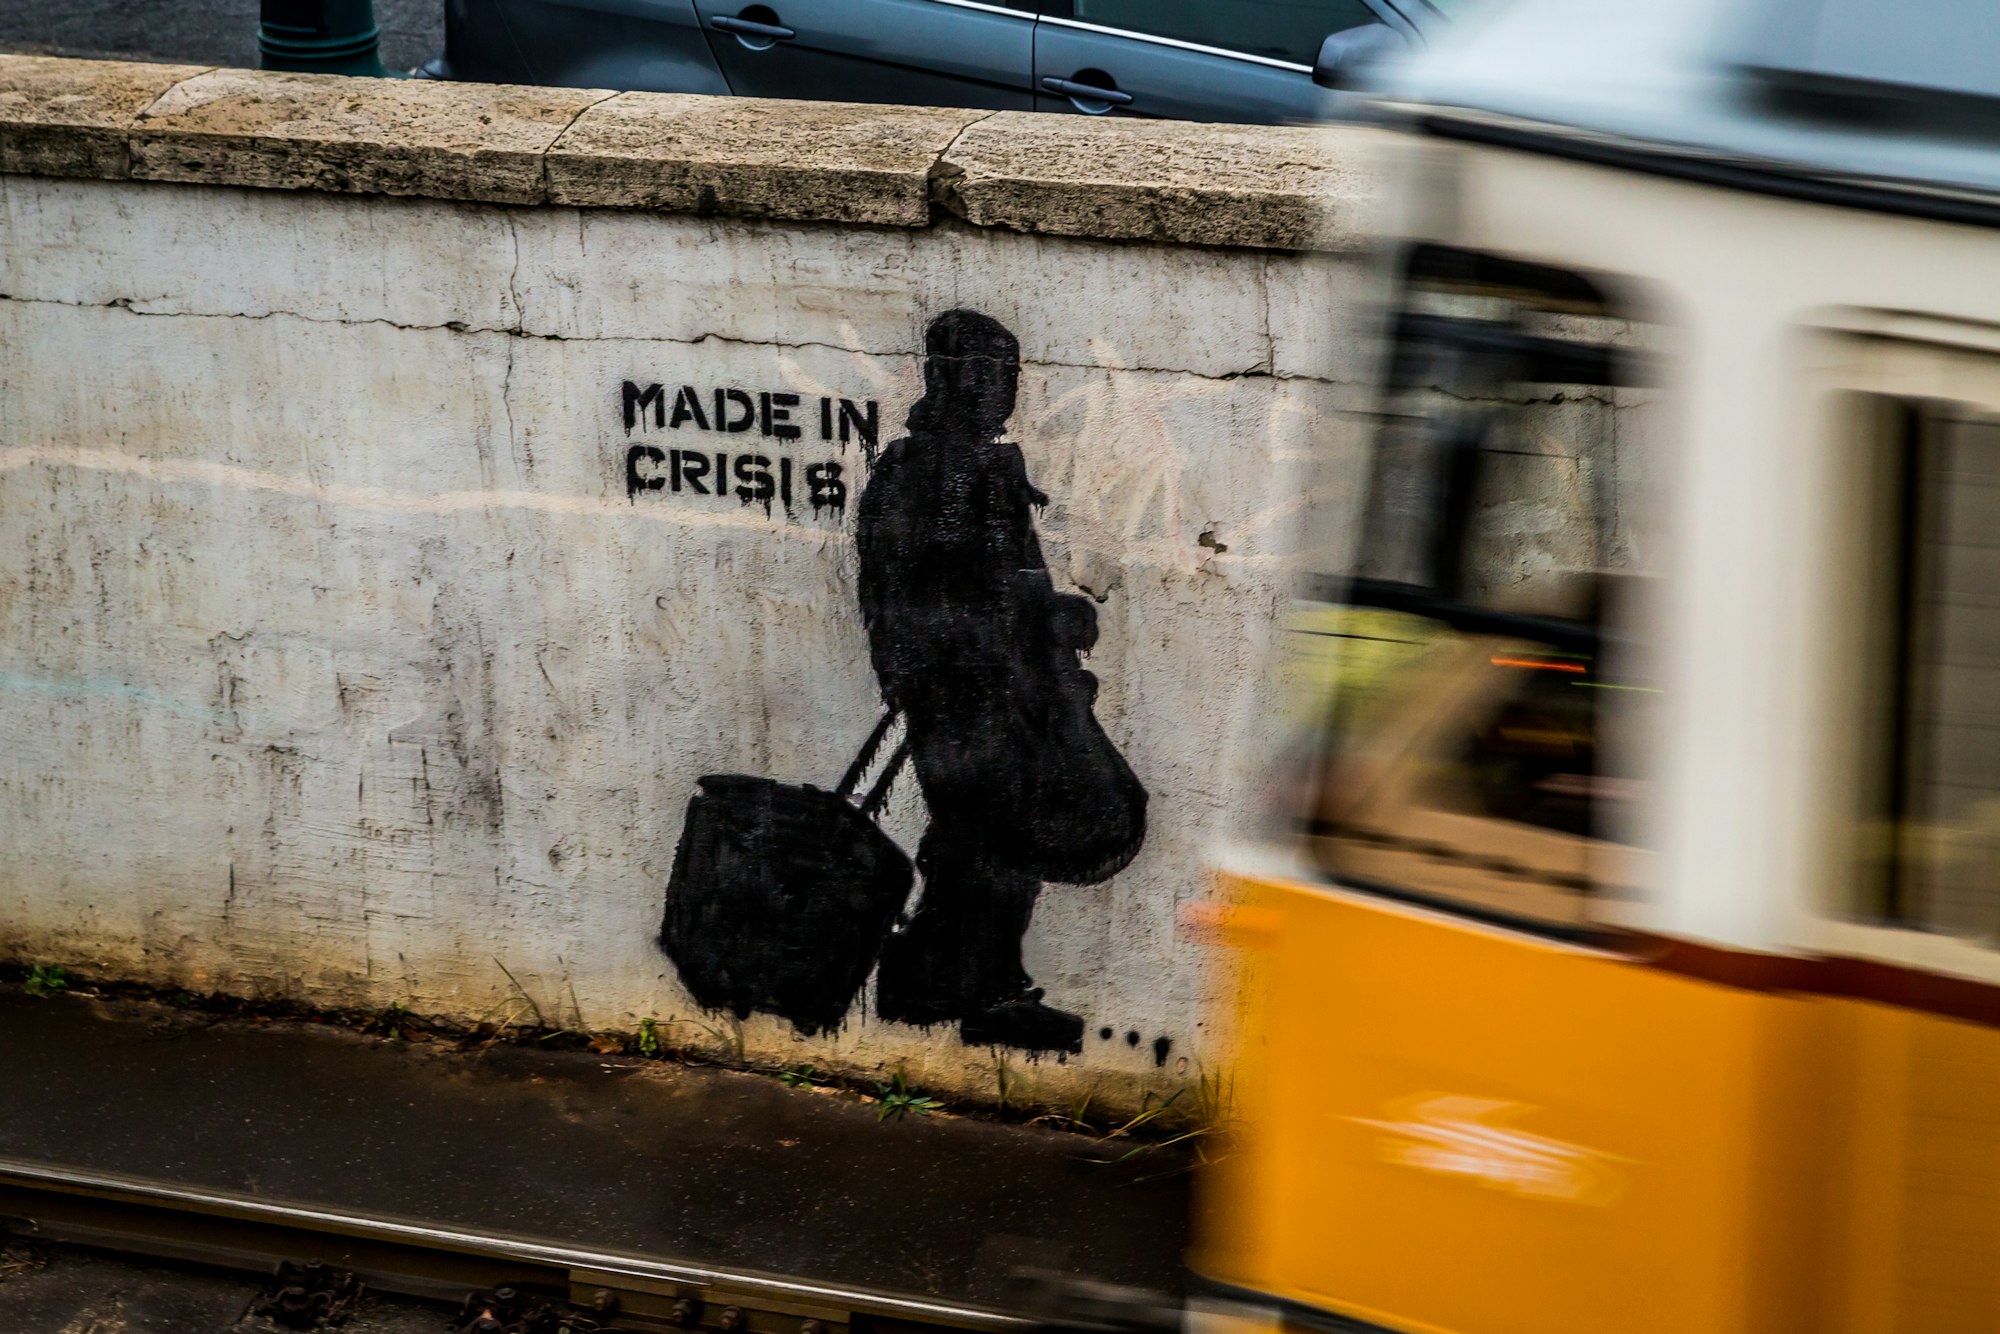 During a city trip to Budapest, Hungary, I saw this stencil street art on a wall at a metro line. For the photo, I chose a shutter speed slower than the metro expected would be and waited some minutes until the metro came.